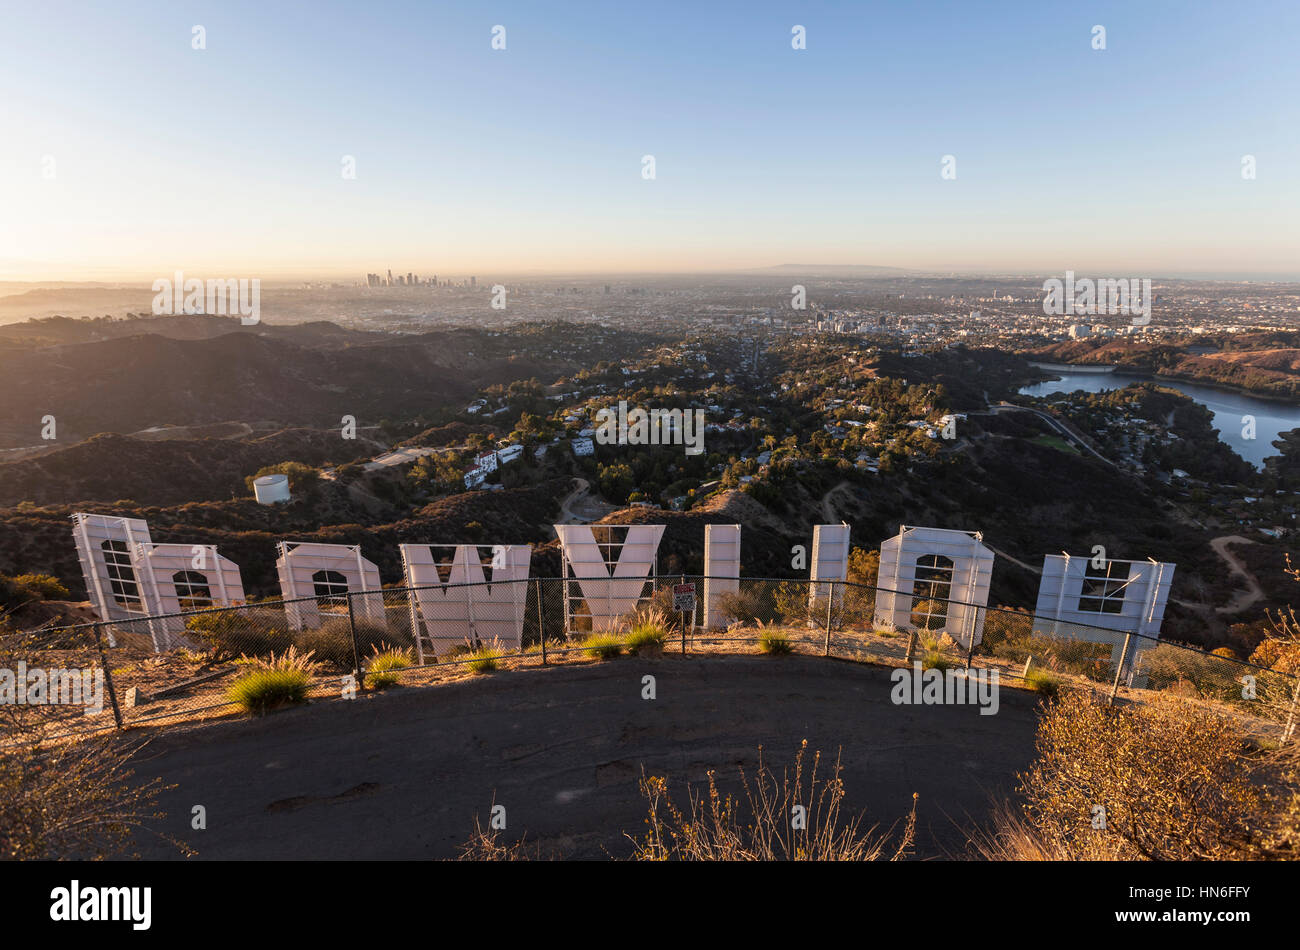 Editorial photo of the back of the Hollywood sign in early morning light. Stock Photo